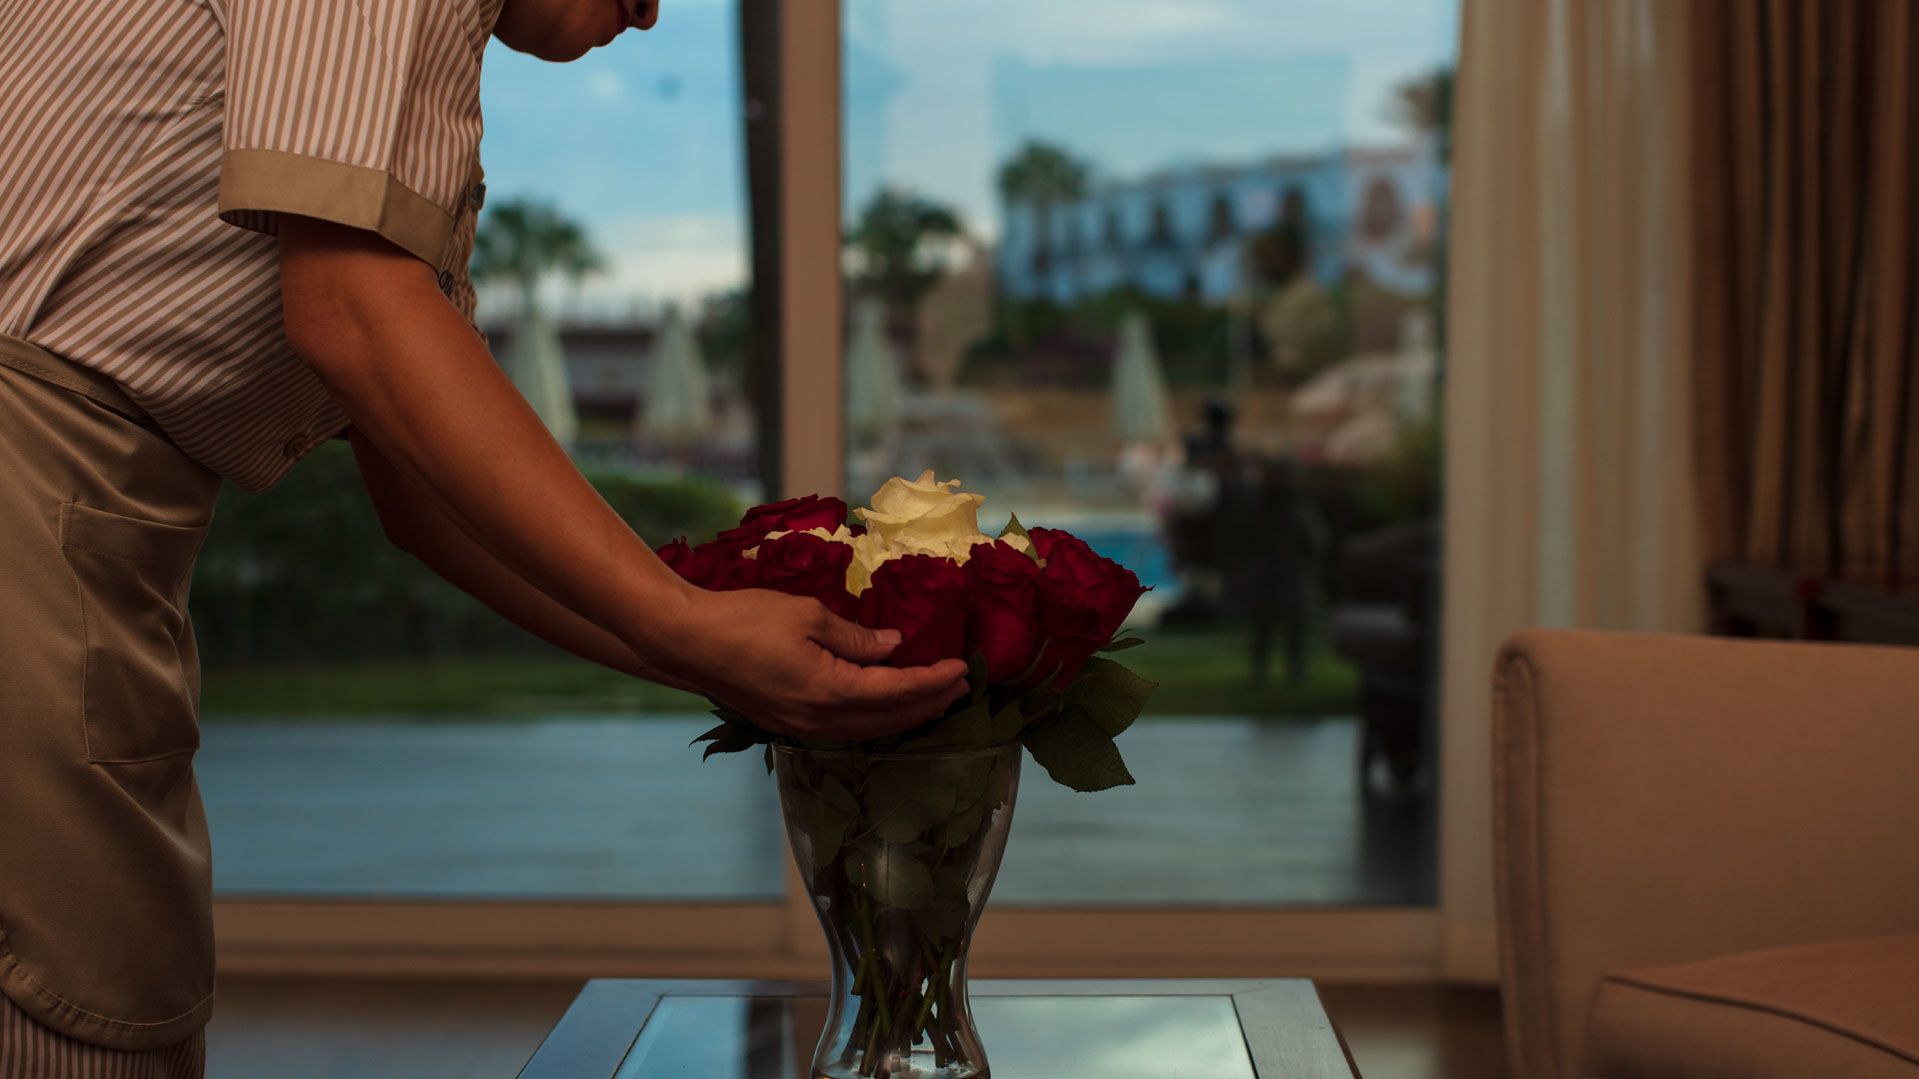 A Person Holding A Vase Of Flowers On A Table